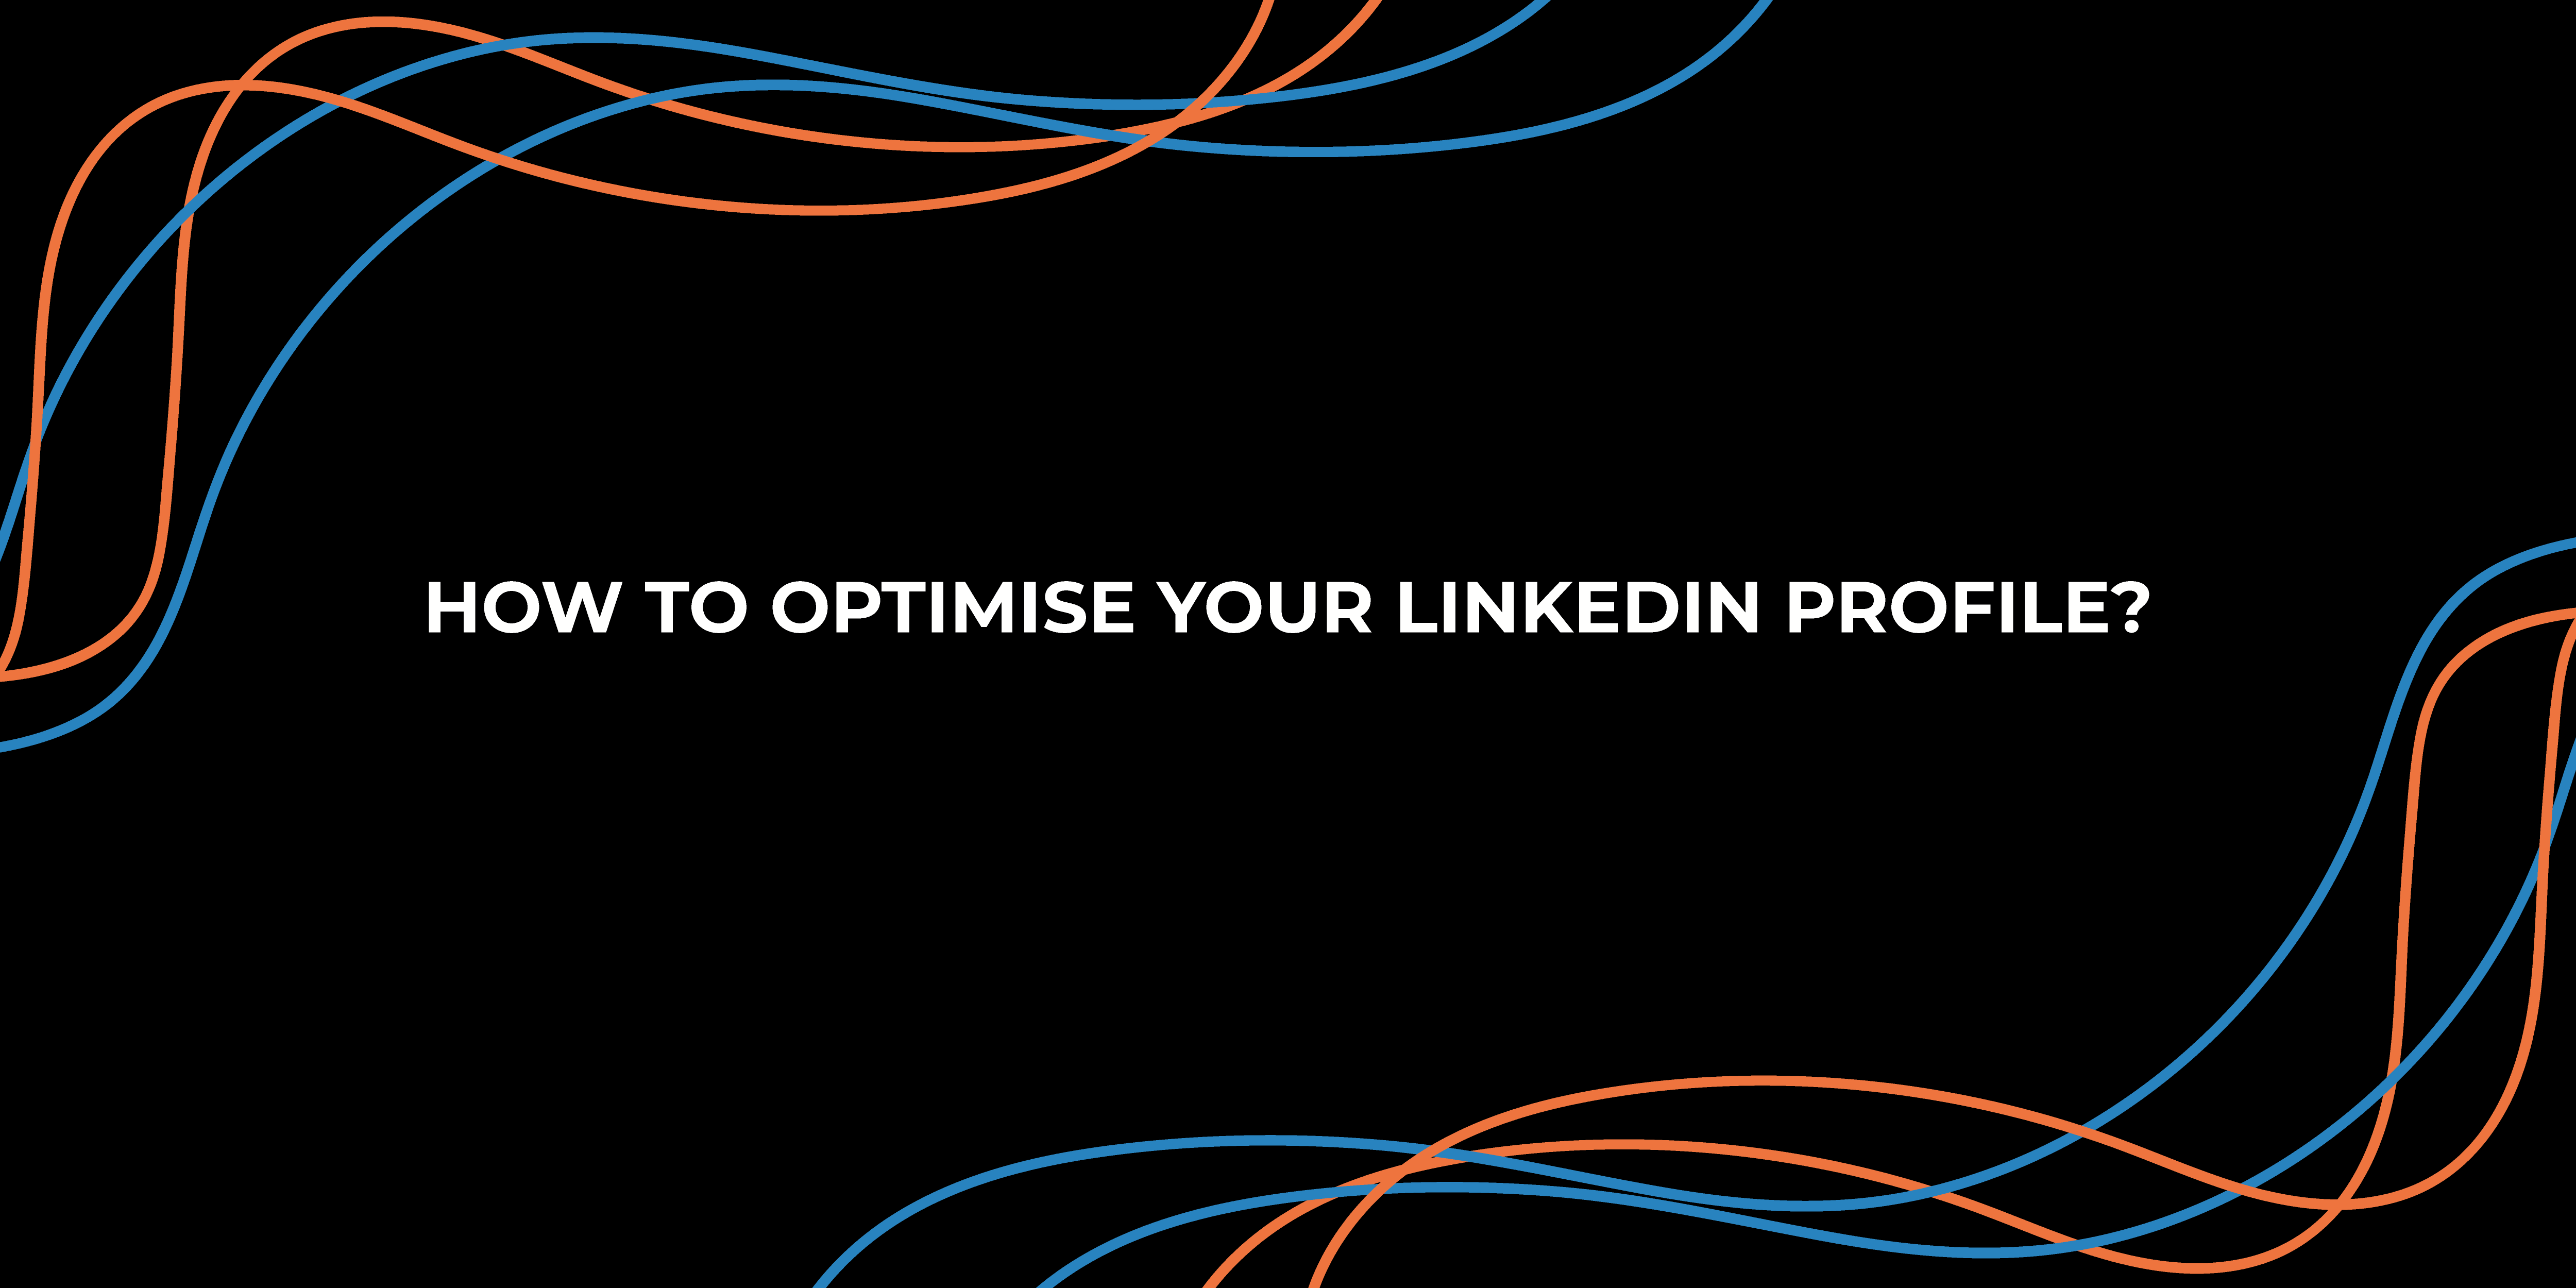 How to Optimise Your LinkedIn Profile?